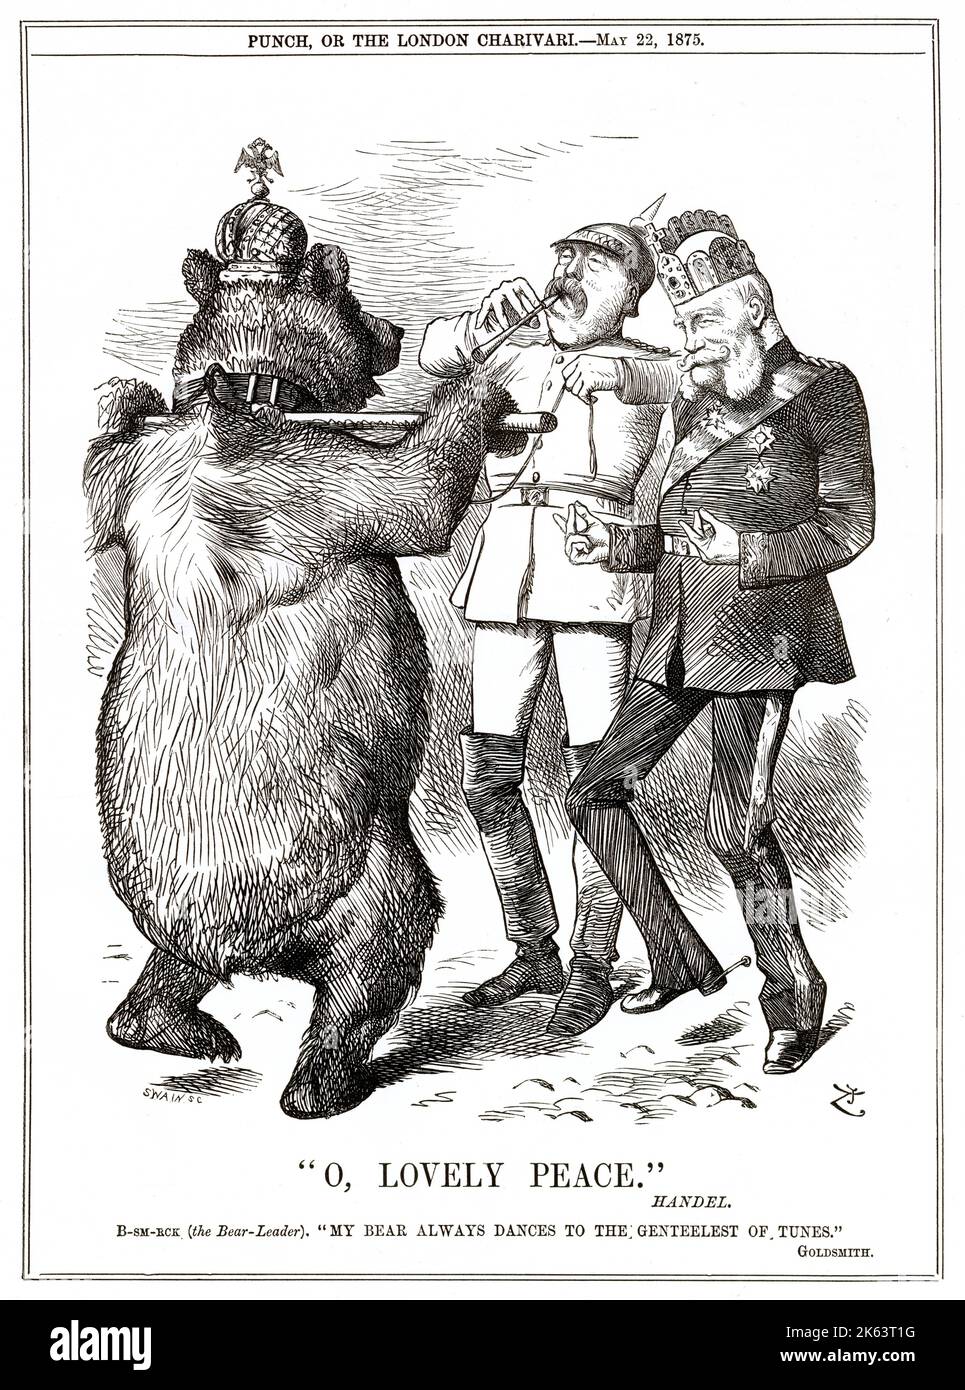 Otto von Bismarck playing the penny whistle, German Emperor William I and Russian bear dancing alone to the music. Stock Photo